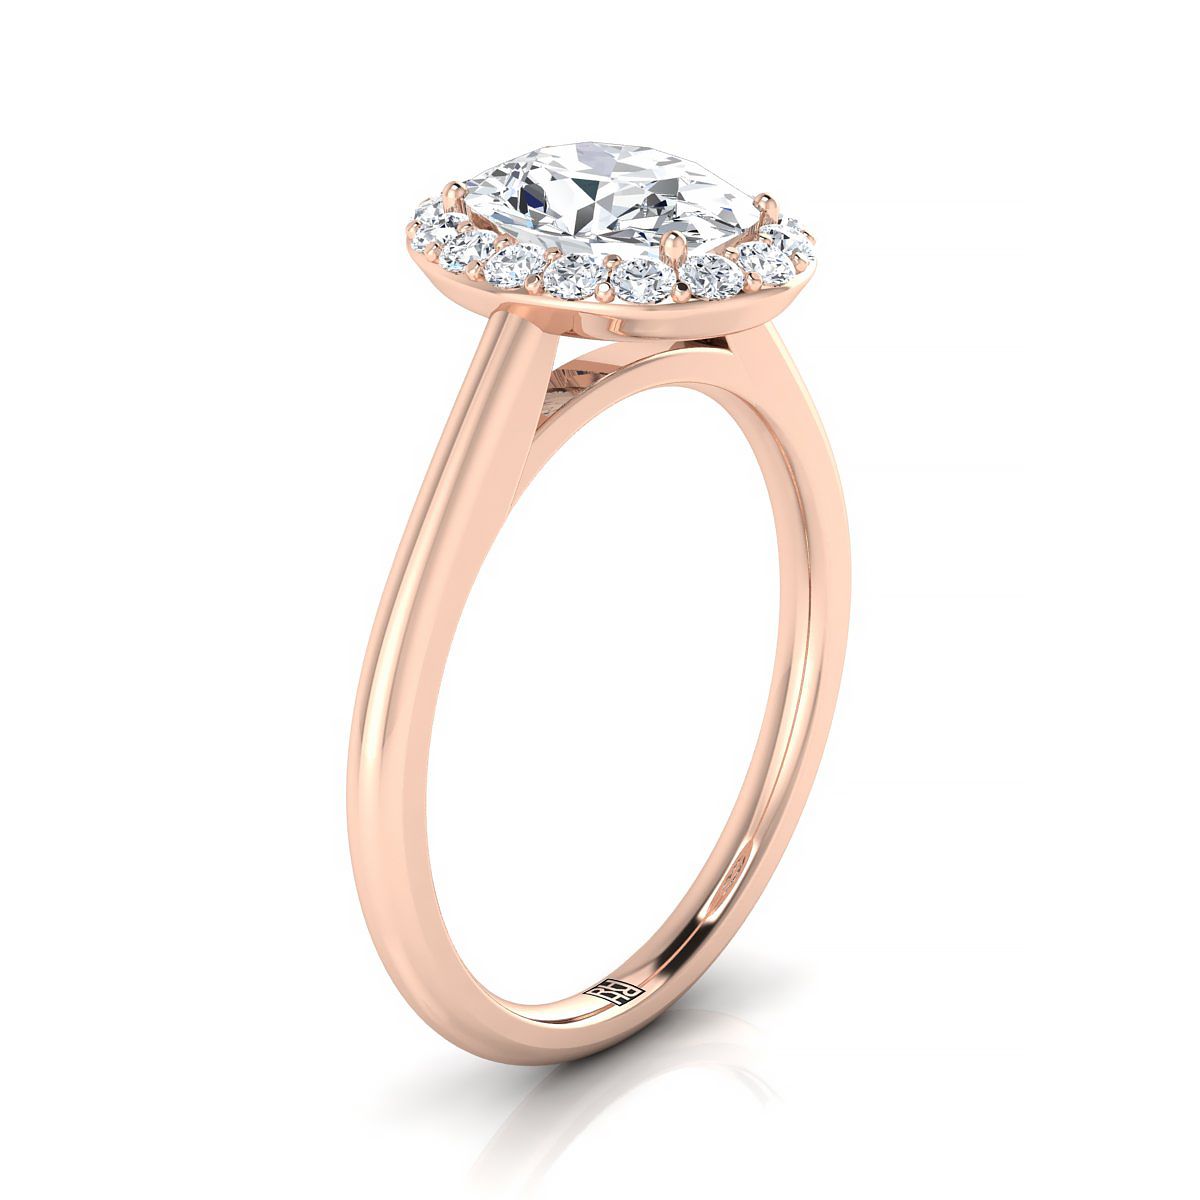 14K Rose Gold Oval Diamond Shared Prong Halo Engagement Ring -1/5ctw